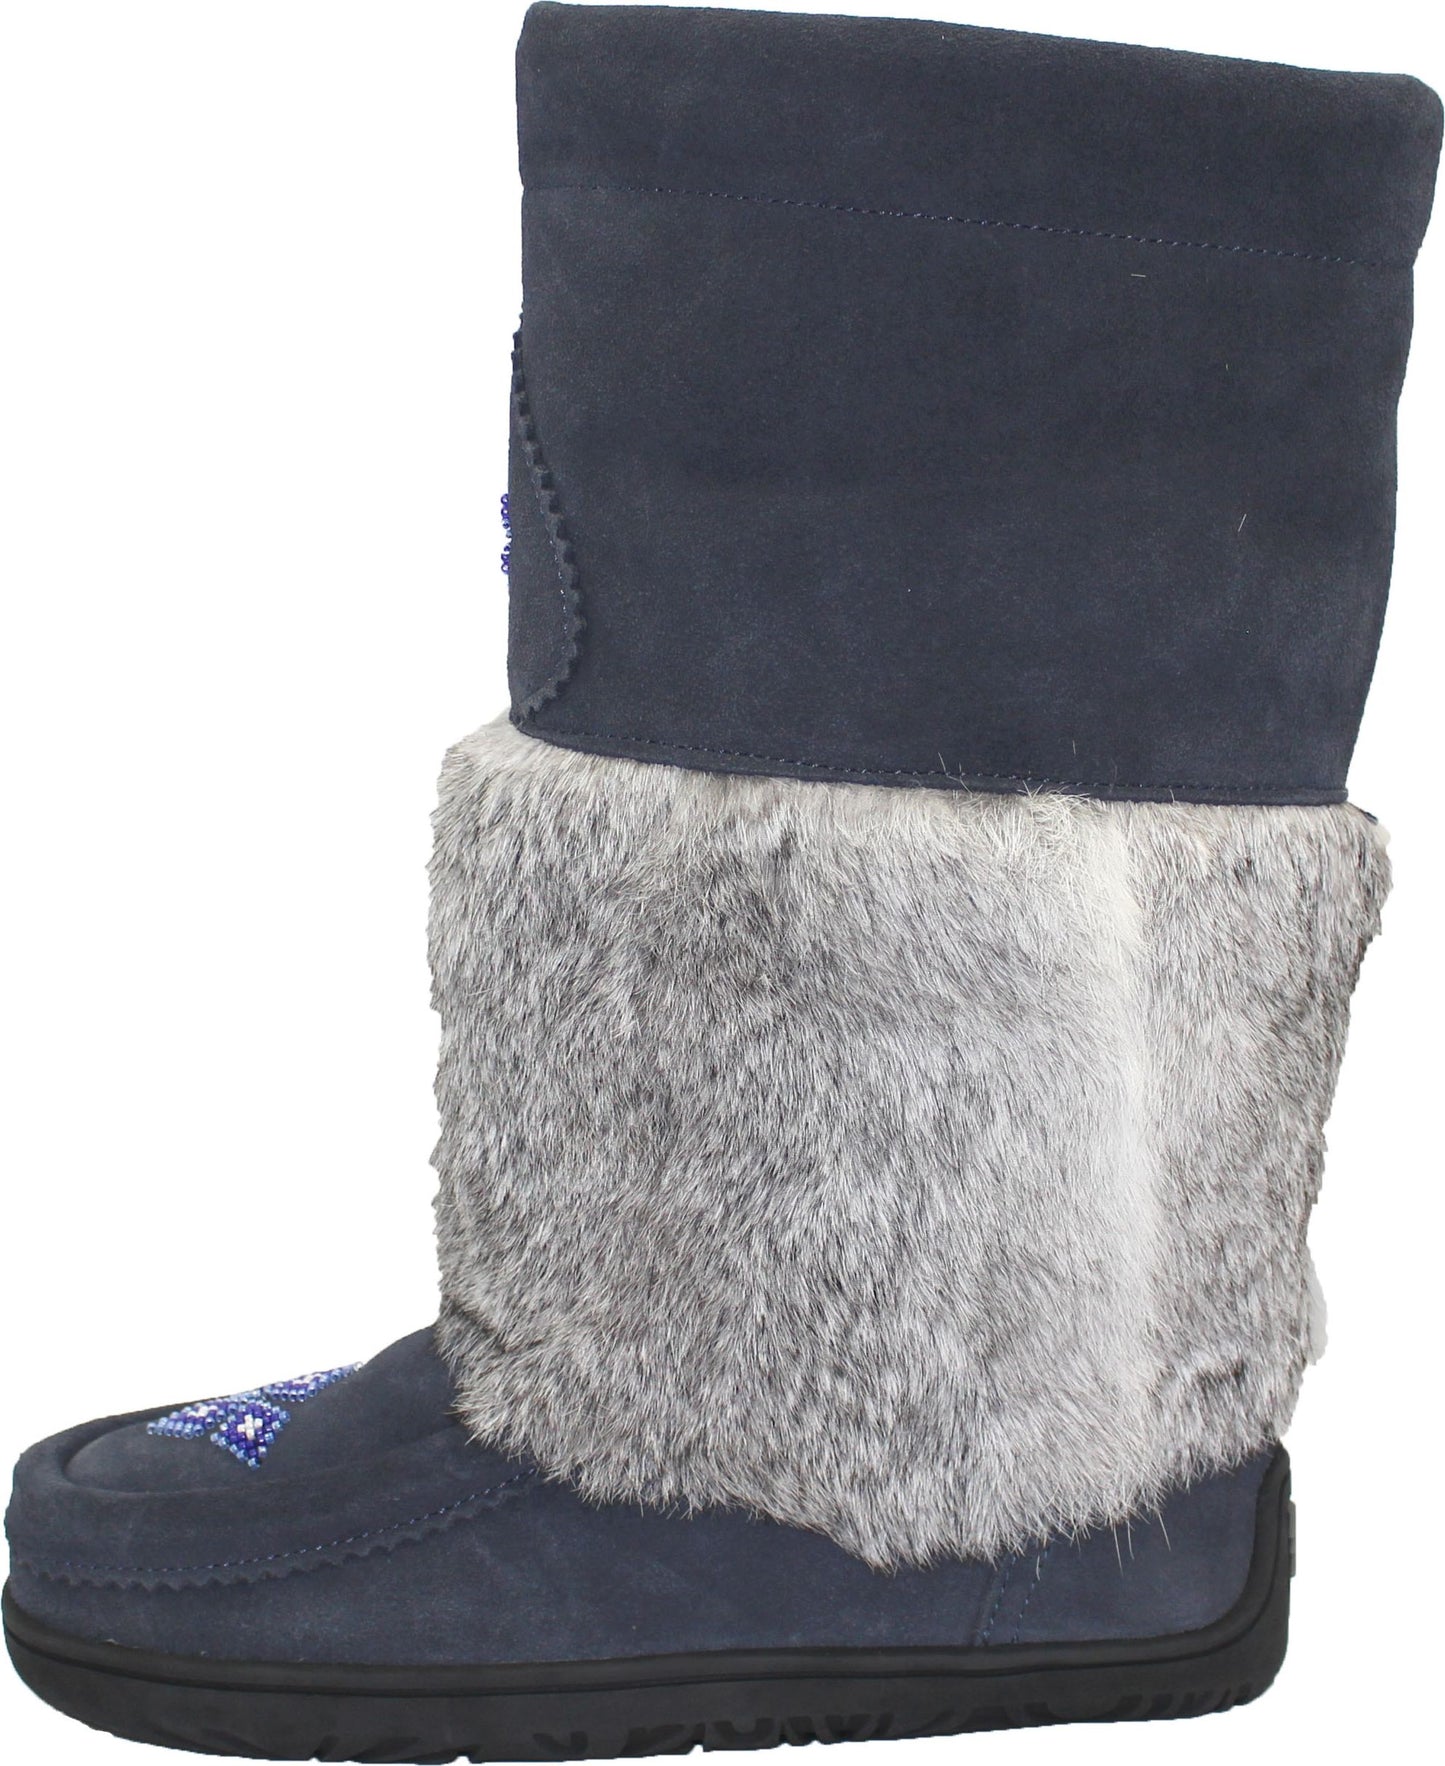 Urban Trail Boots Tall Waterproof Navy Suede Mukluk